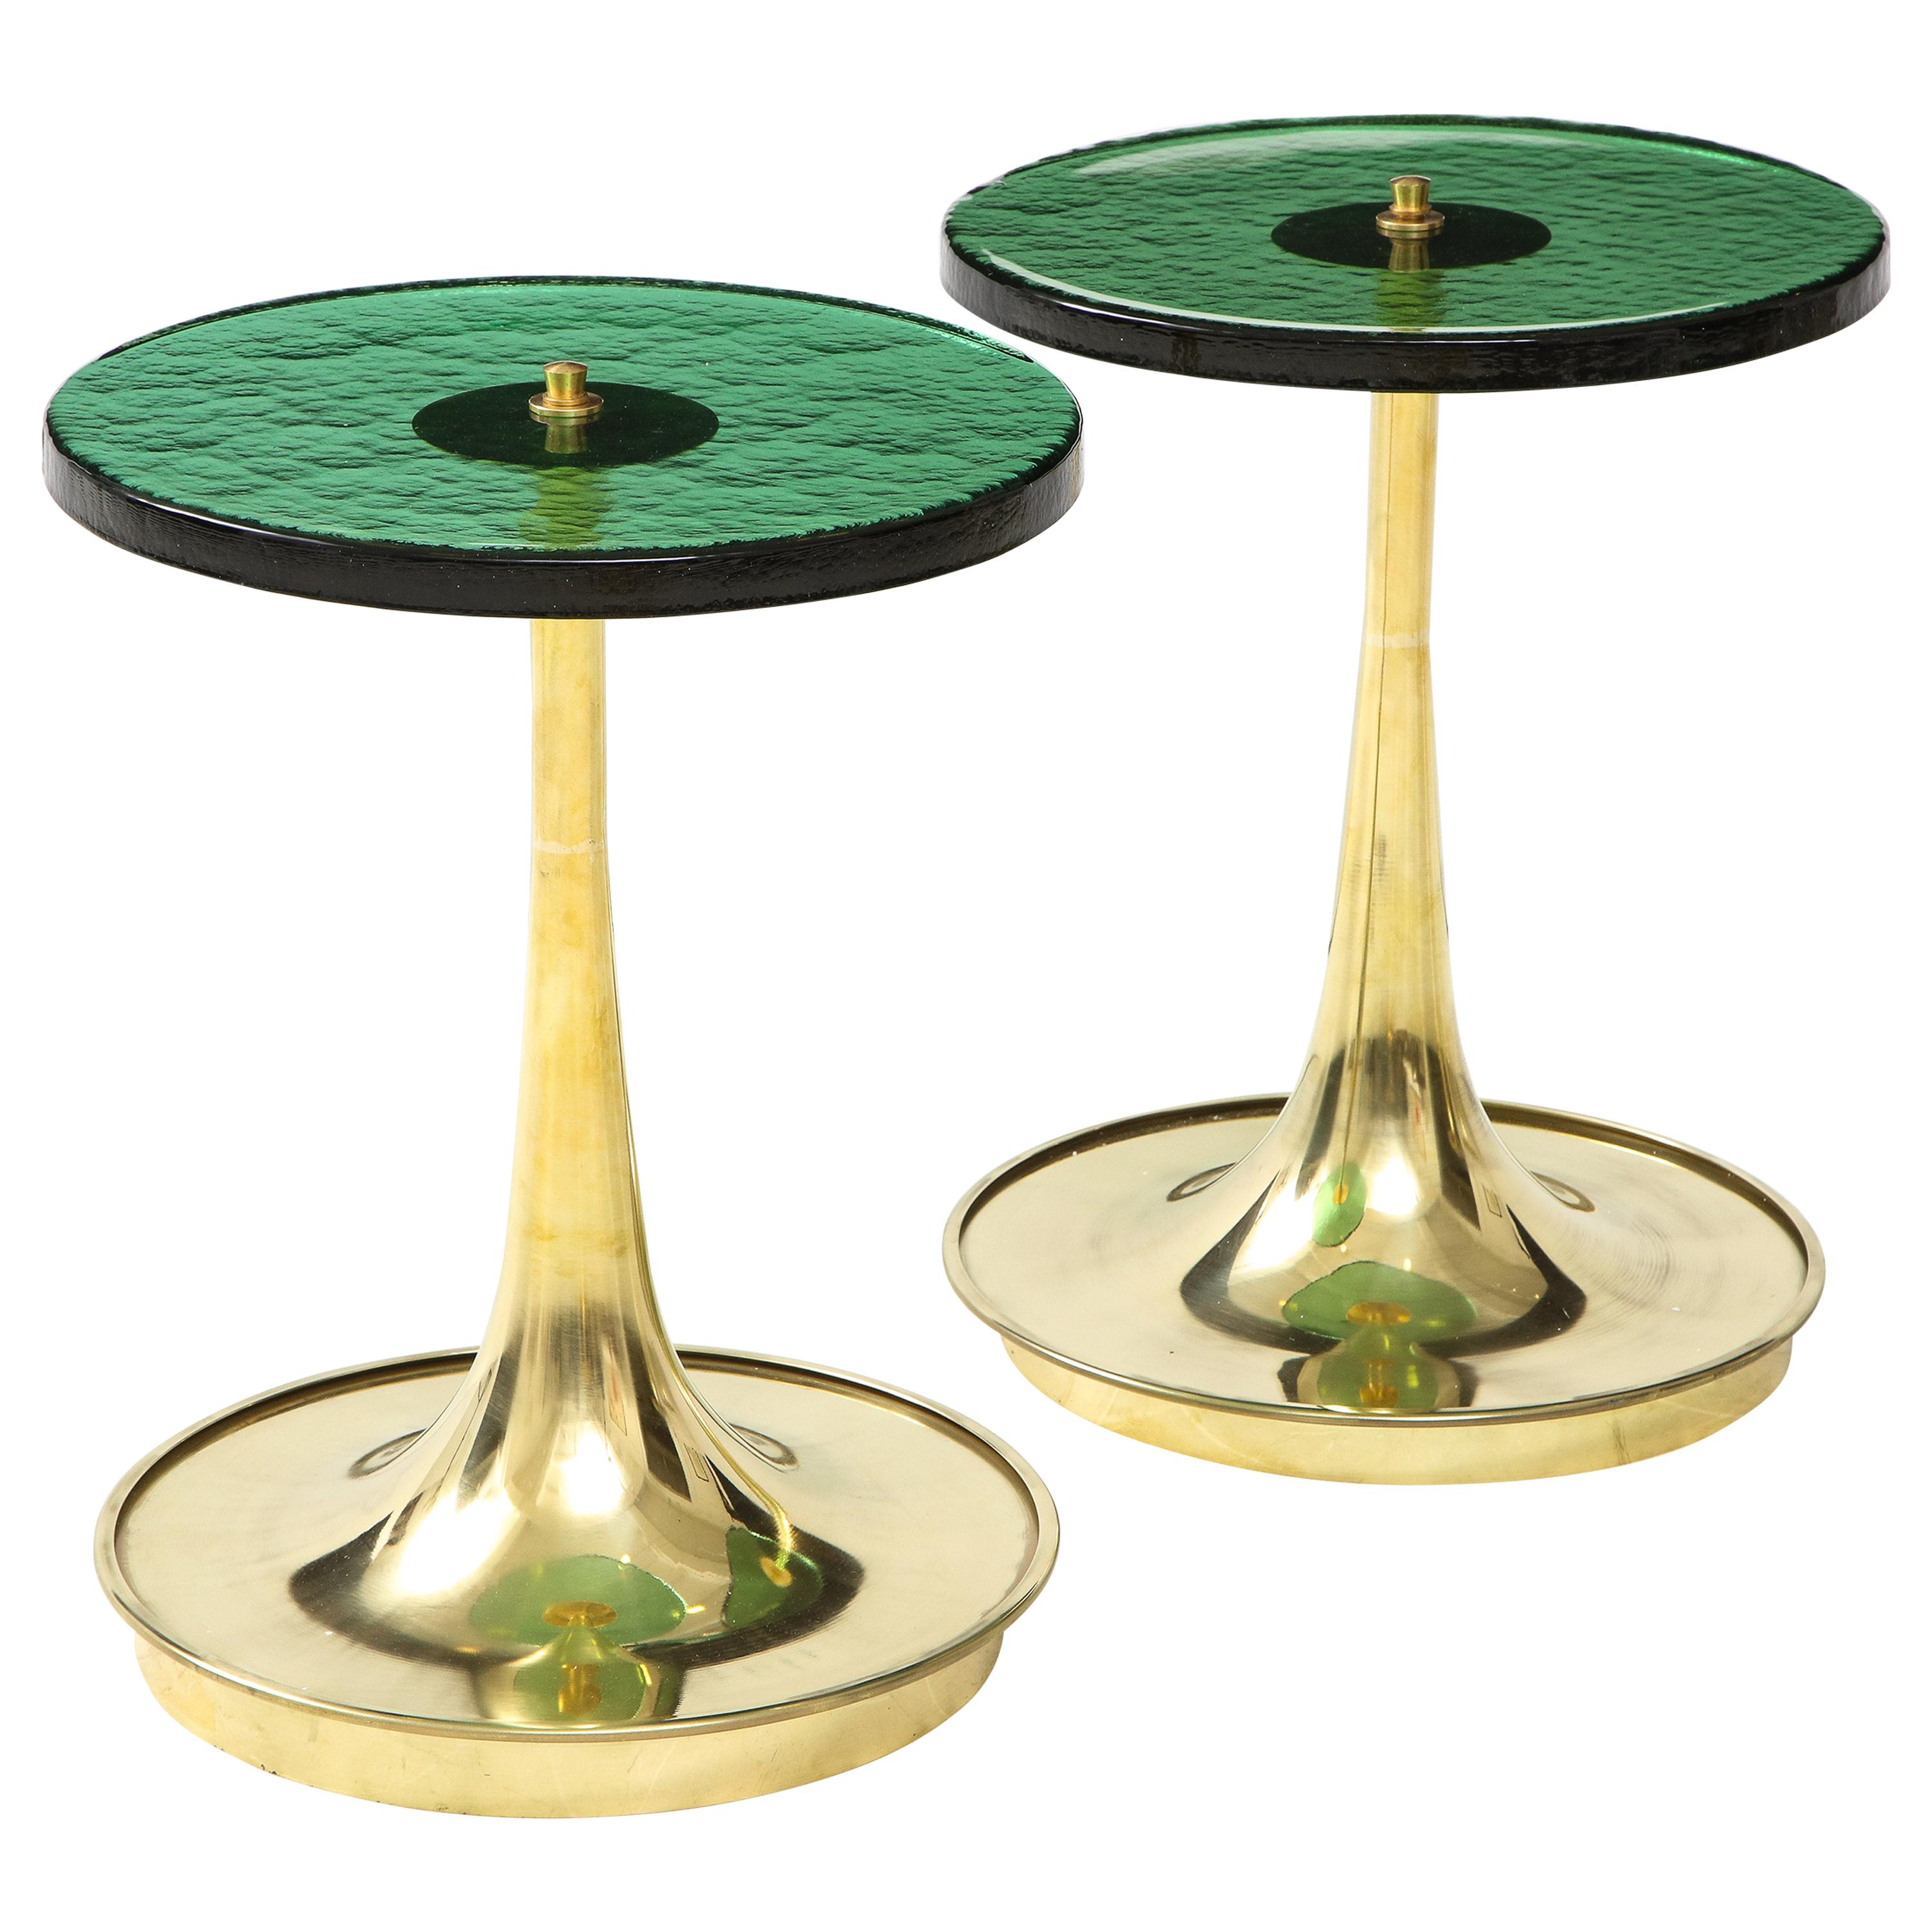 Pair of Round Emerald Green Murano Glass and Brass Martini Tables, Italy, 2021